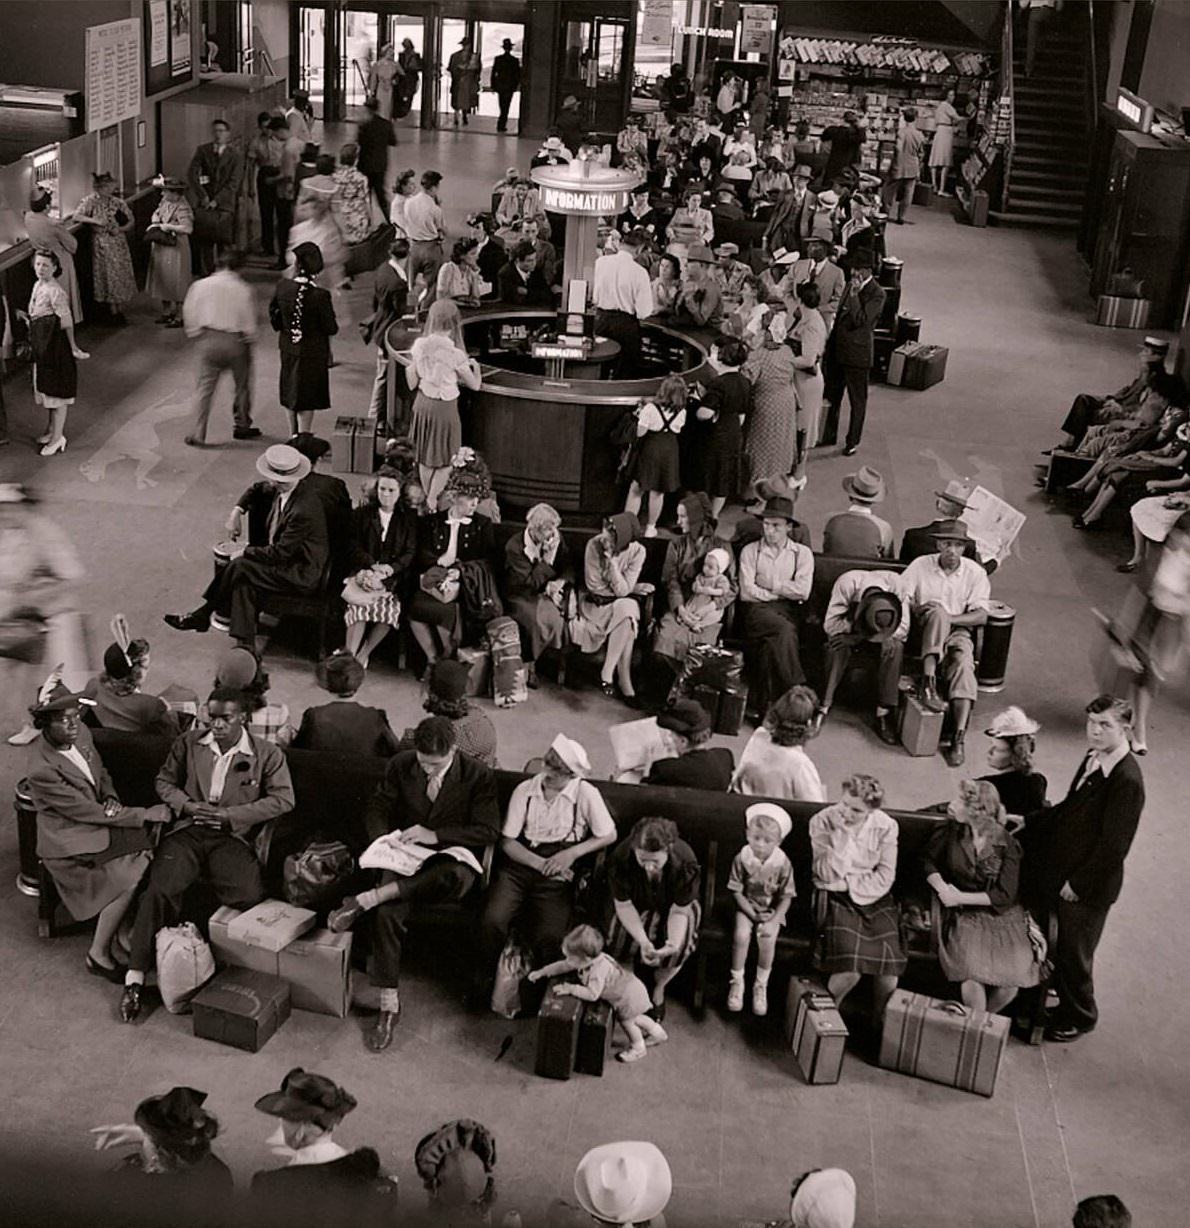 Greyhound Bus Terminal Waiting Room in 1950s-1960s Pittsburgh, 1952